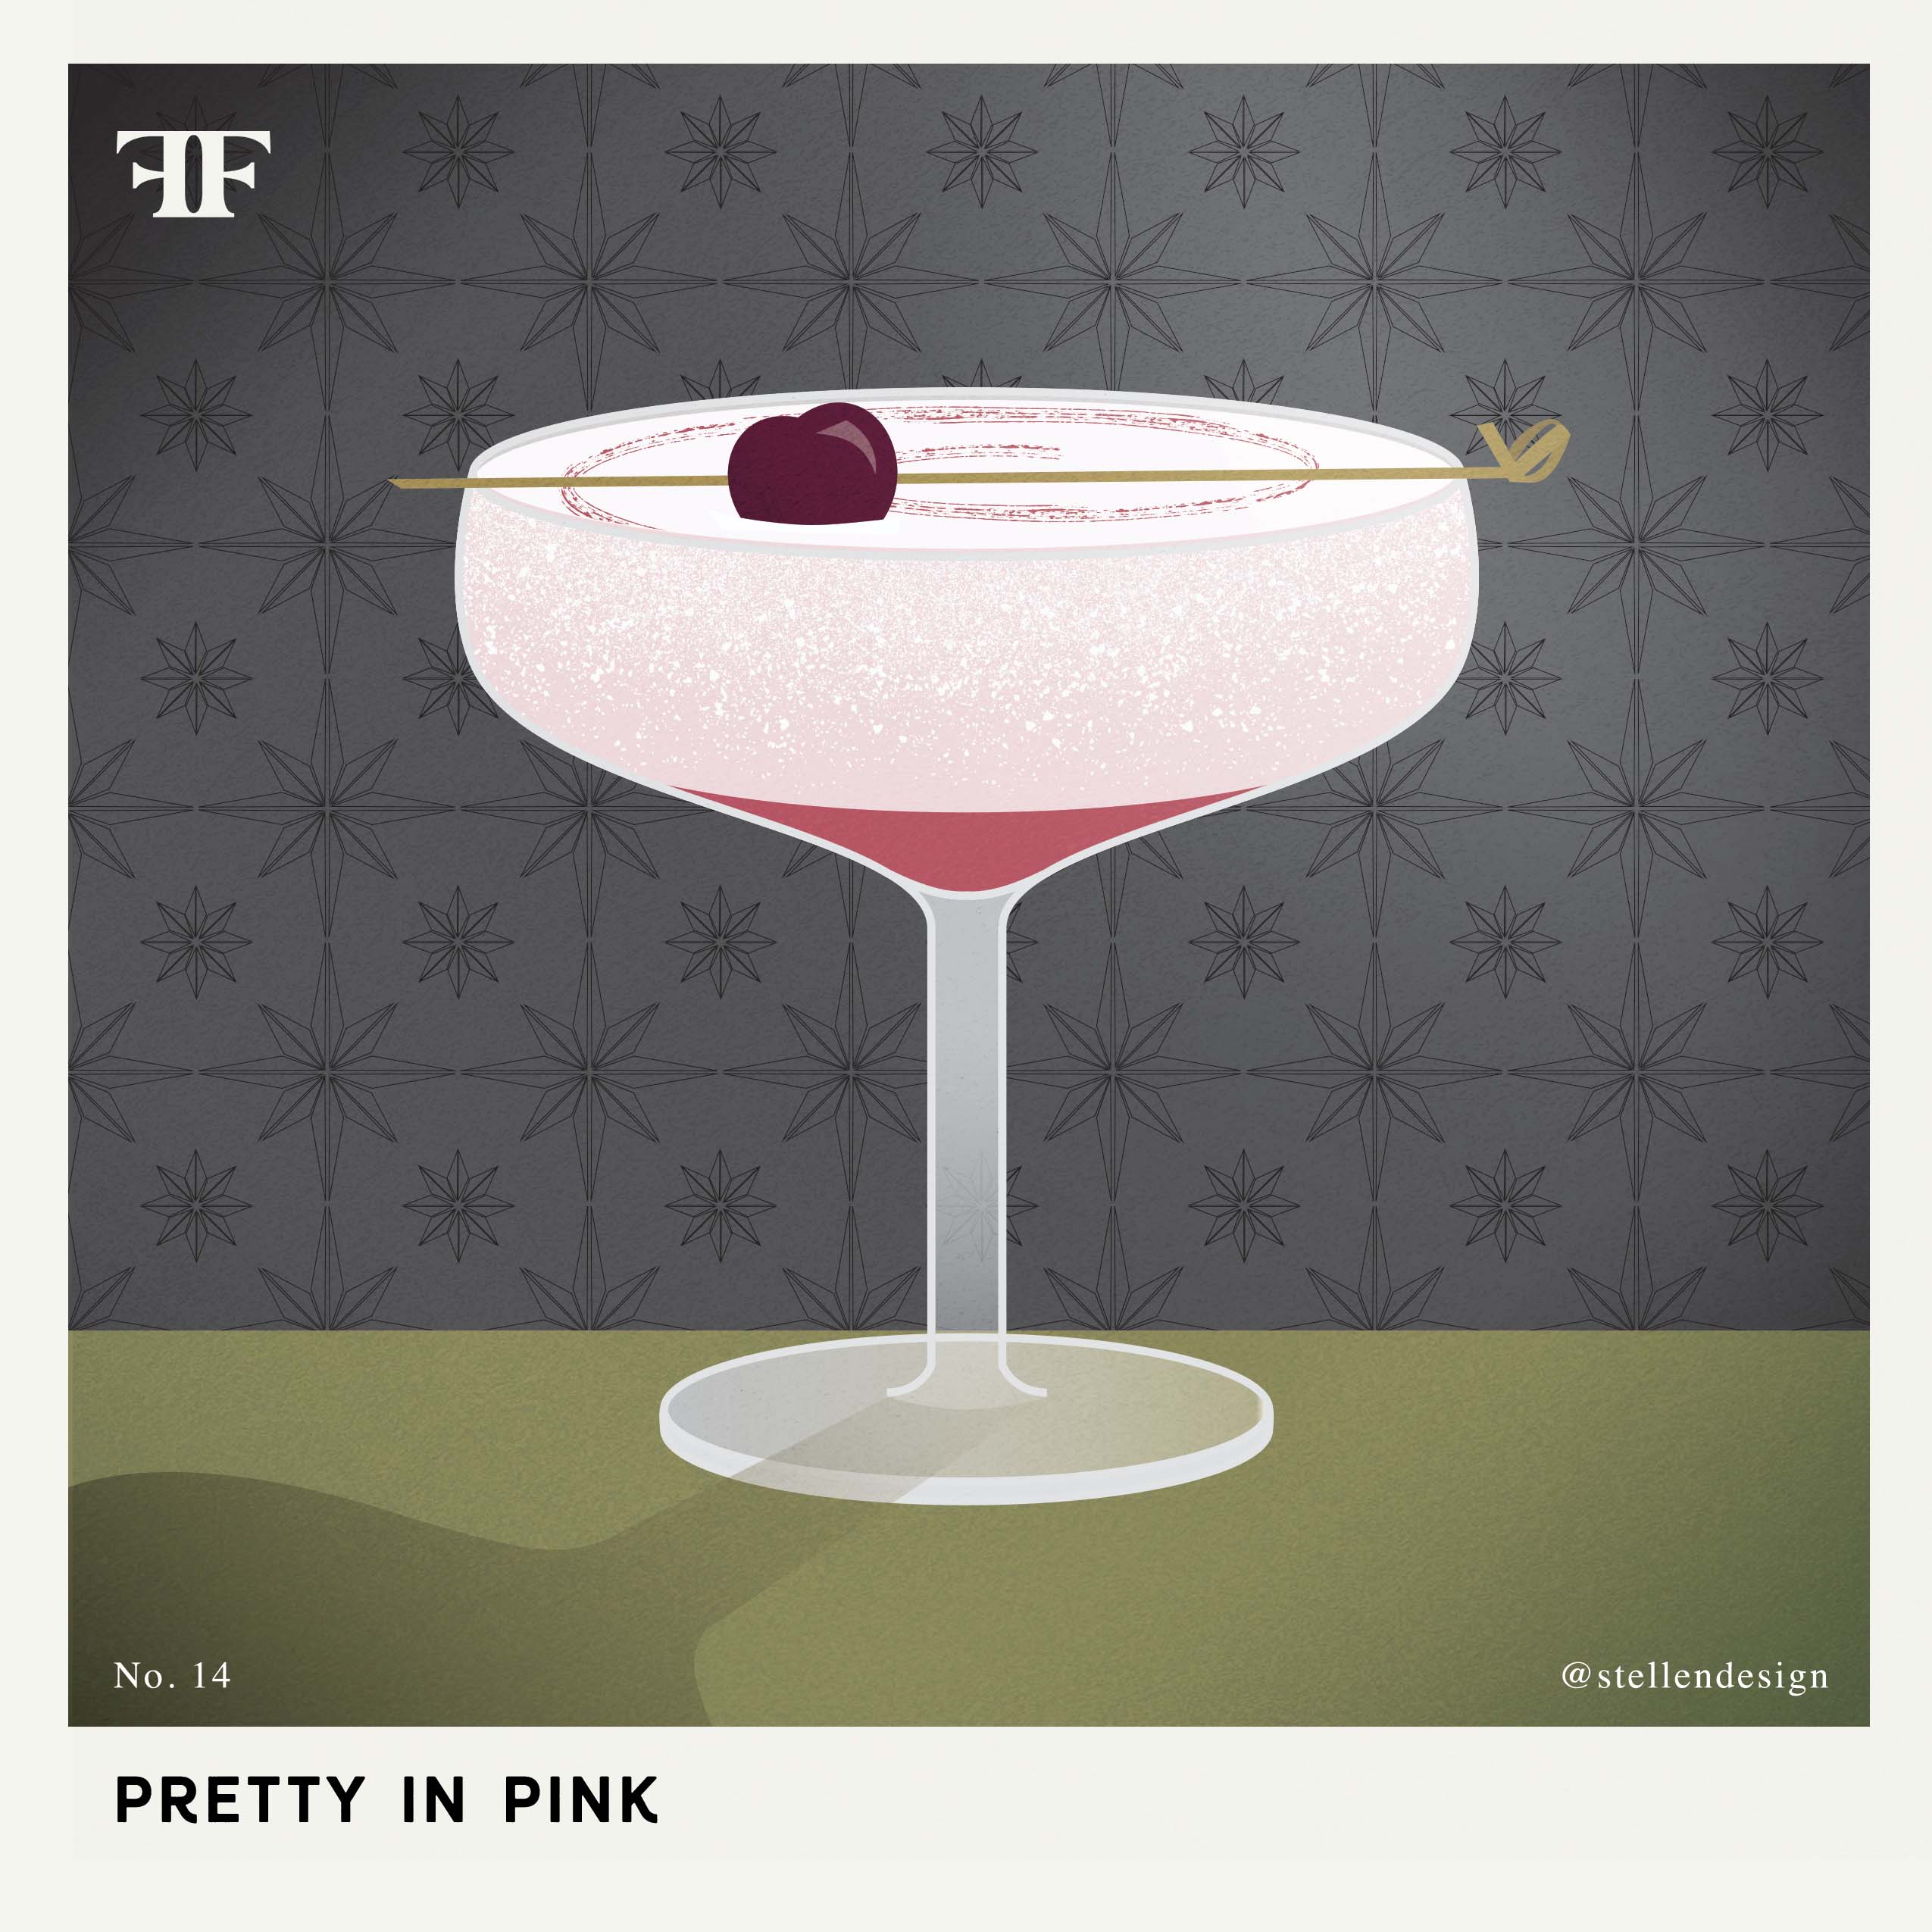 Cocktail illustration of a Pretty in Pink martini at Fox & Farrow in Hermosa Beach by Stellen Design Branding Agency in Los Angeles CA